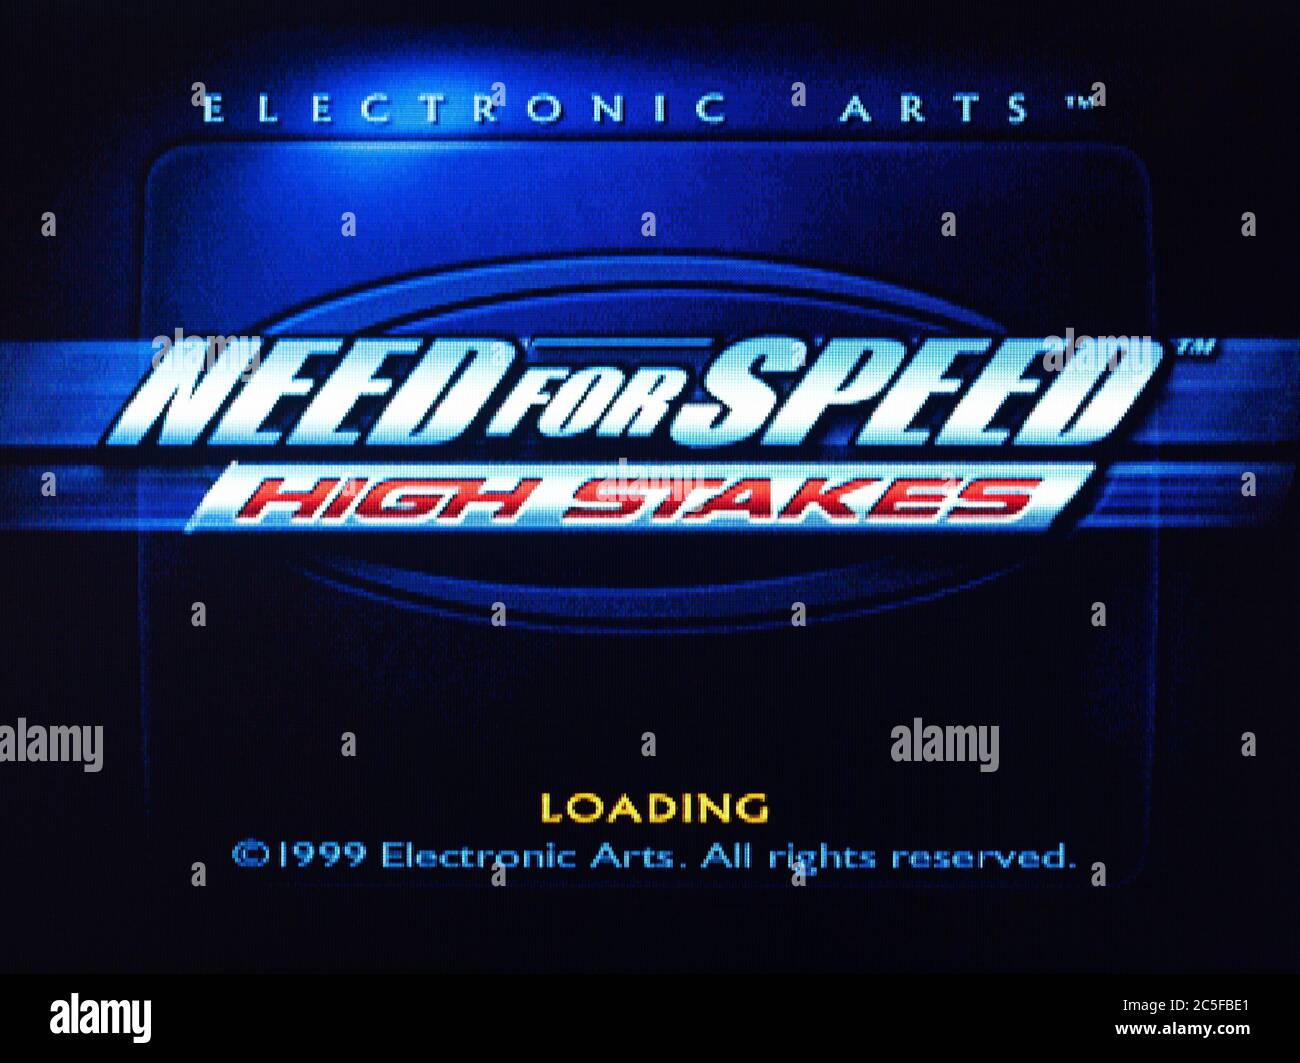 Need For Speed High Stakes -  - PlayStation Racing